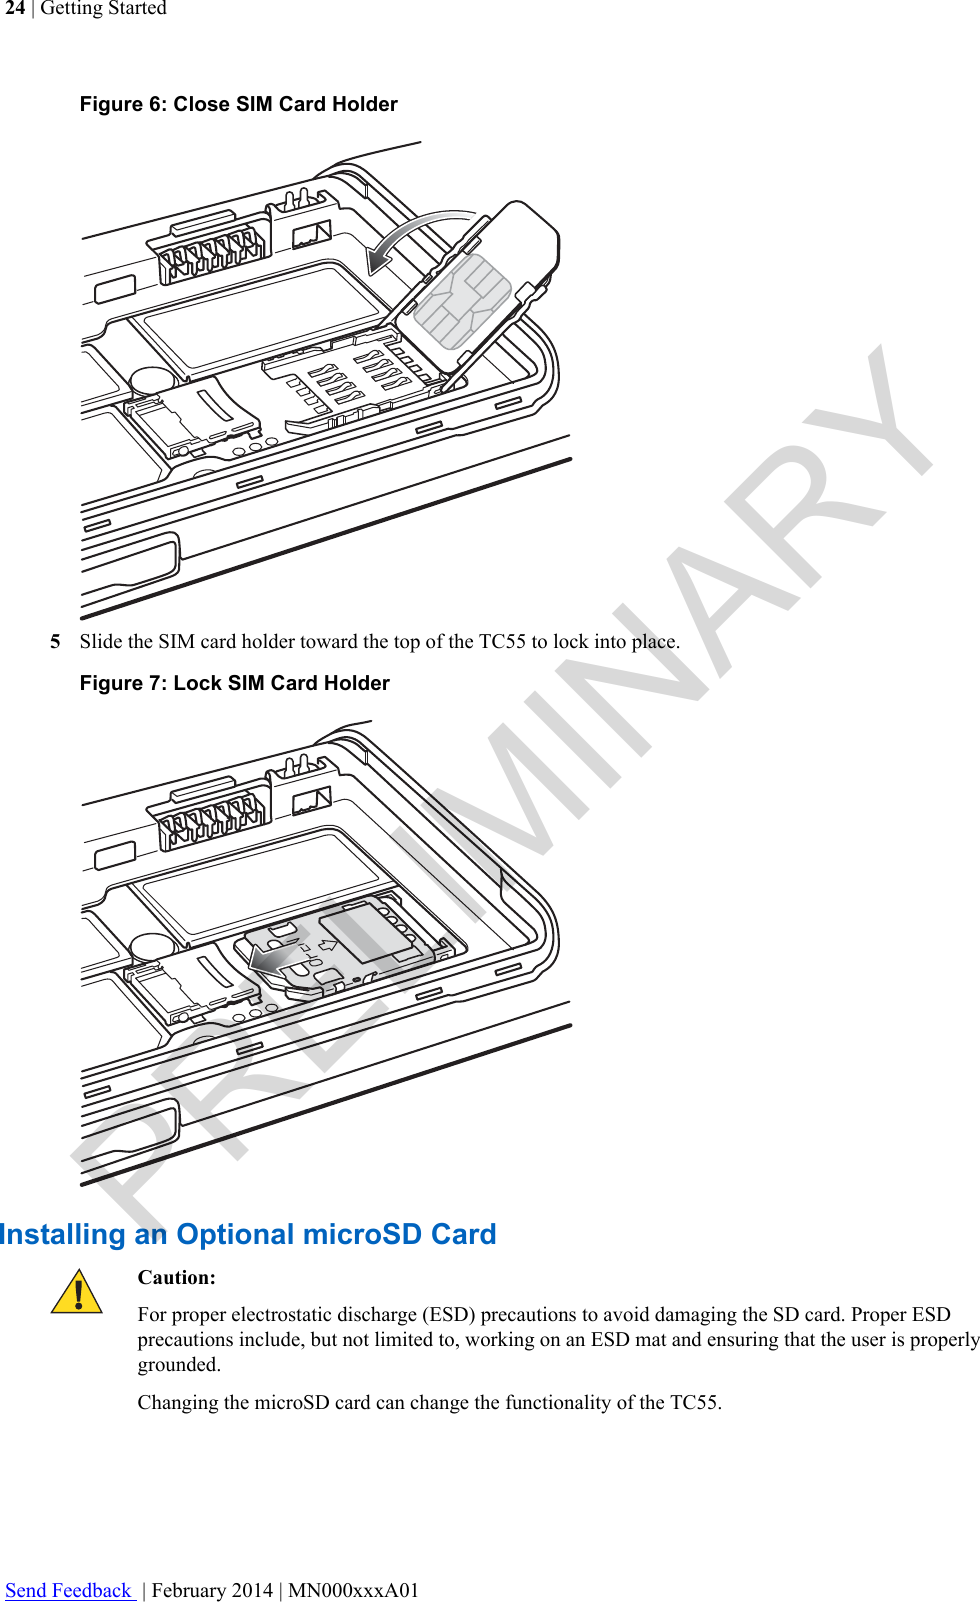 Figure 6: Close SIM Card Holder5Slide the SIM card holder toward the top of the TC55 to lock into place.Figure 7: Lock SIM Card HolderInstalling an Optional microSD CardCaution:For proper electrostatic discharge (ESD) precautions to avoid damaging the SD card. Proper ESDprecautions include, but not limited to, working on an ESD mat and ensuring that the user is properlygrounded.Changing the microSD card can change the functionality of the TC55.24 | Getting StartedSend Feedback  | February 2014 | MN000xxxA01PRELIMINARY